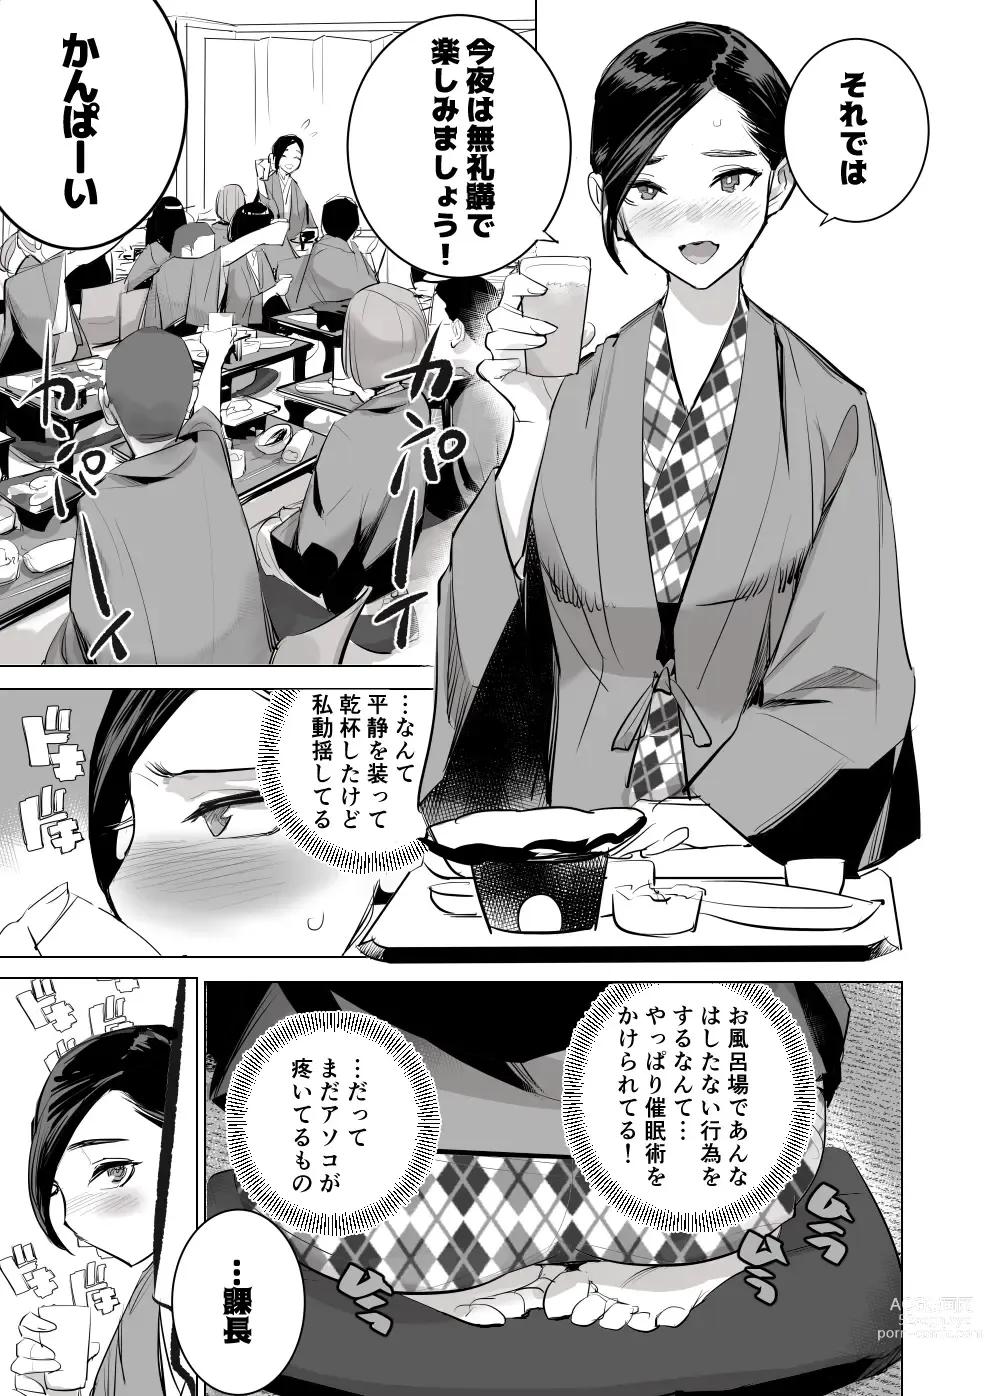 Page 24 of doujinshi Section Leader